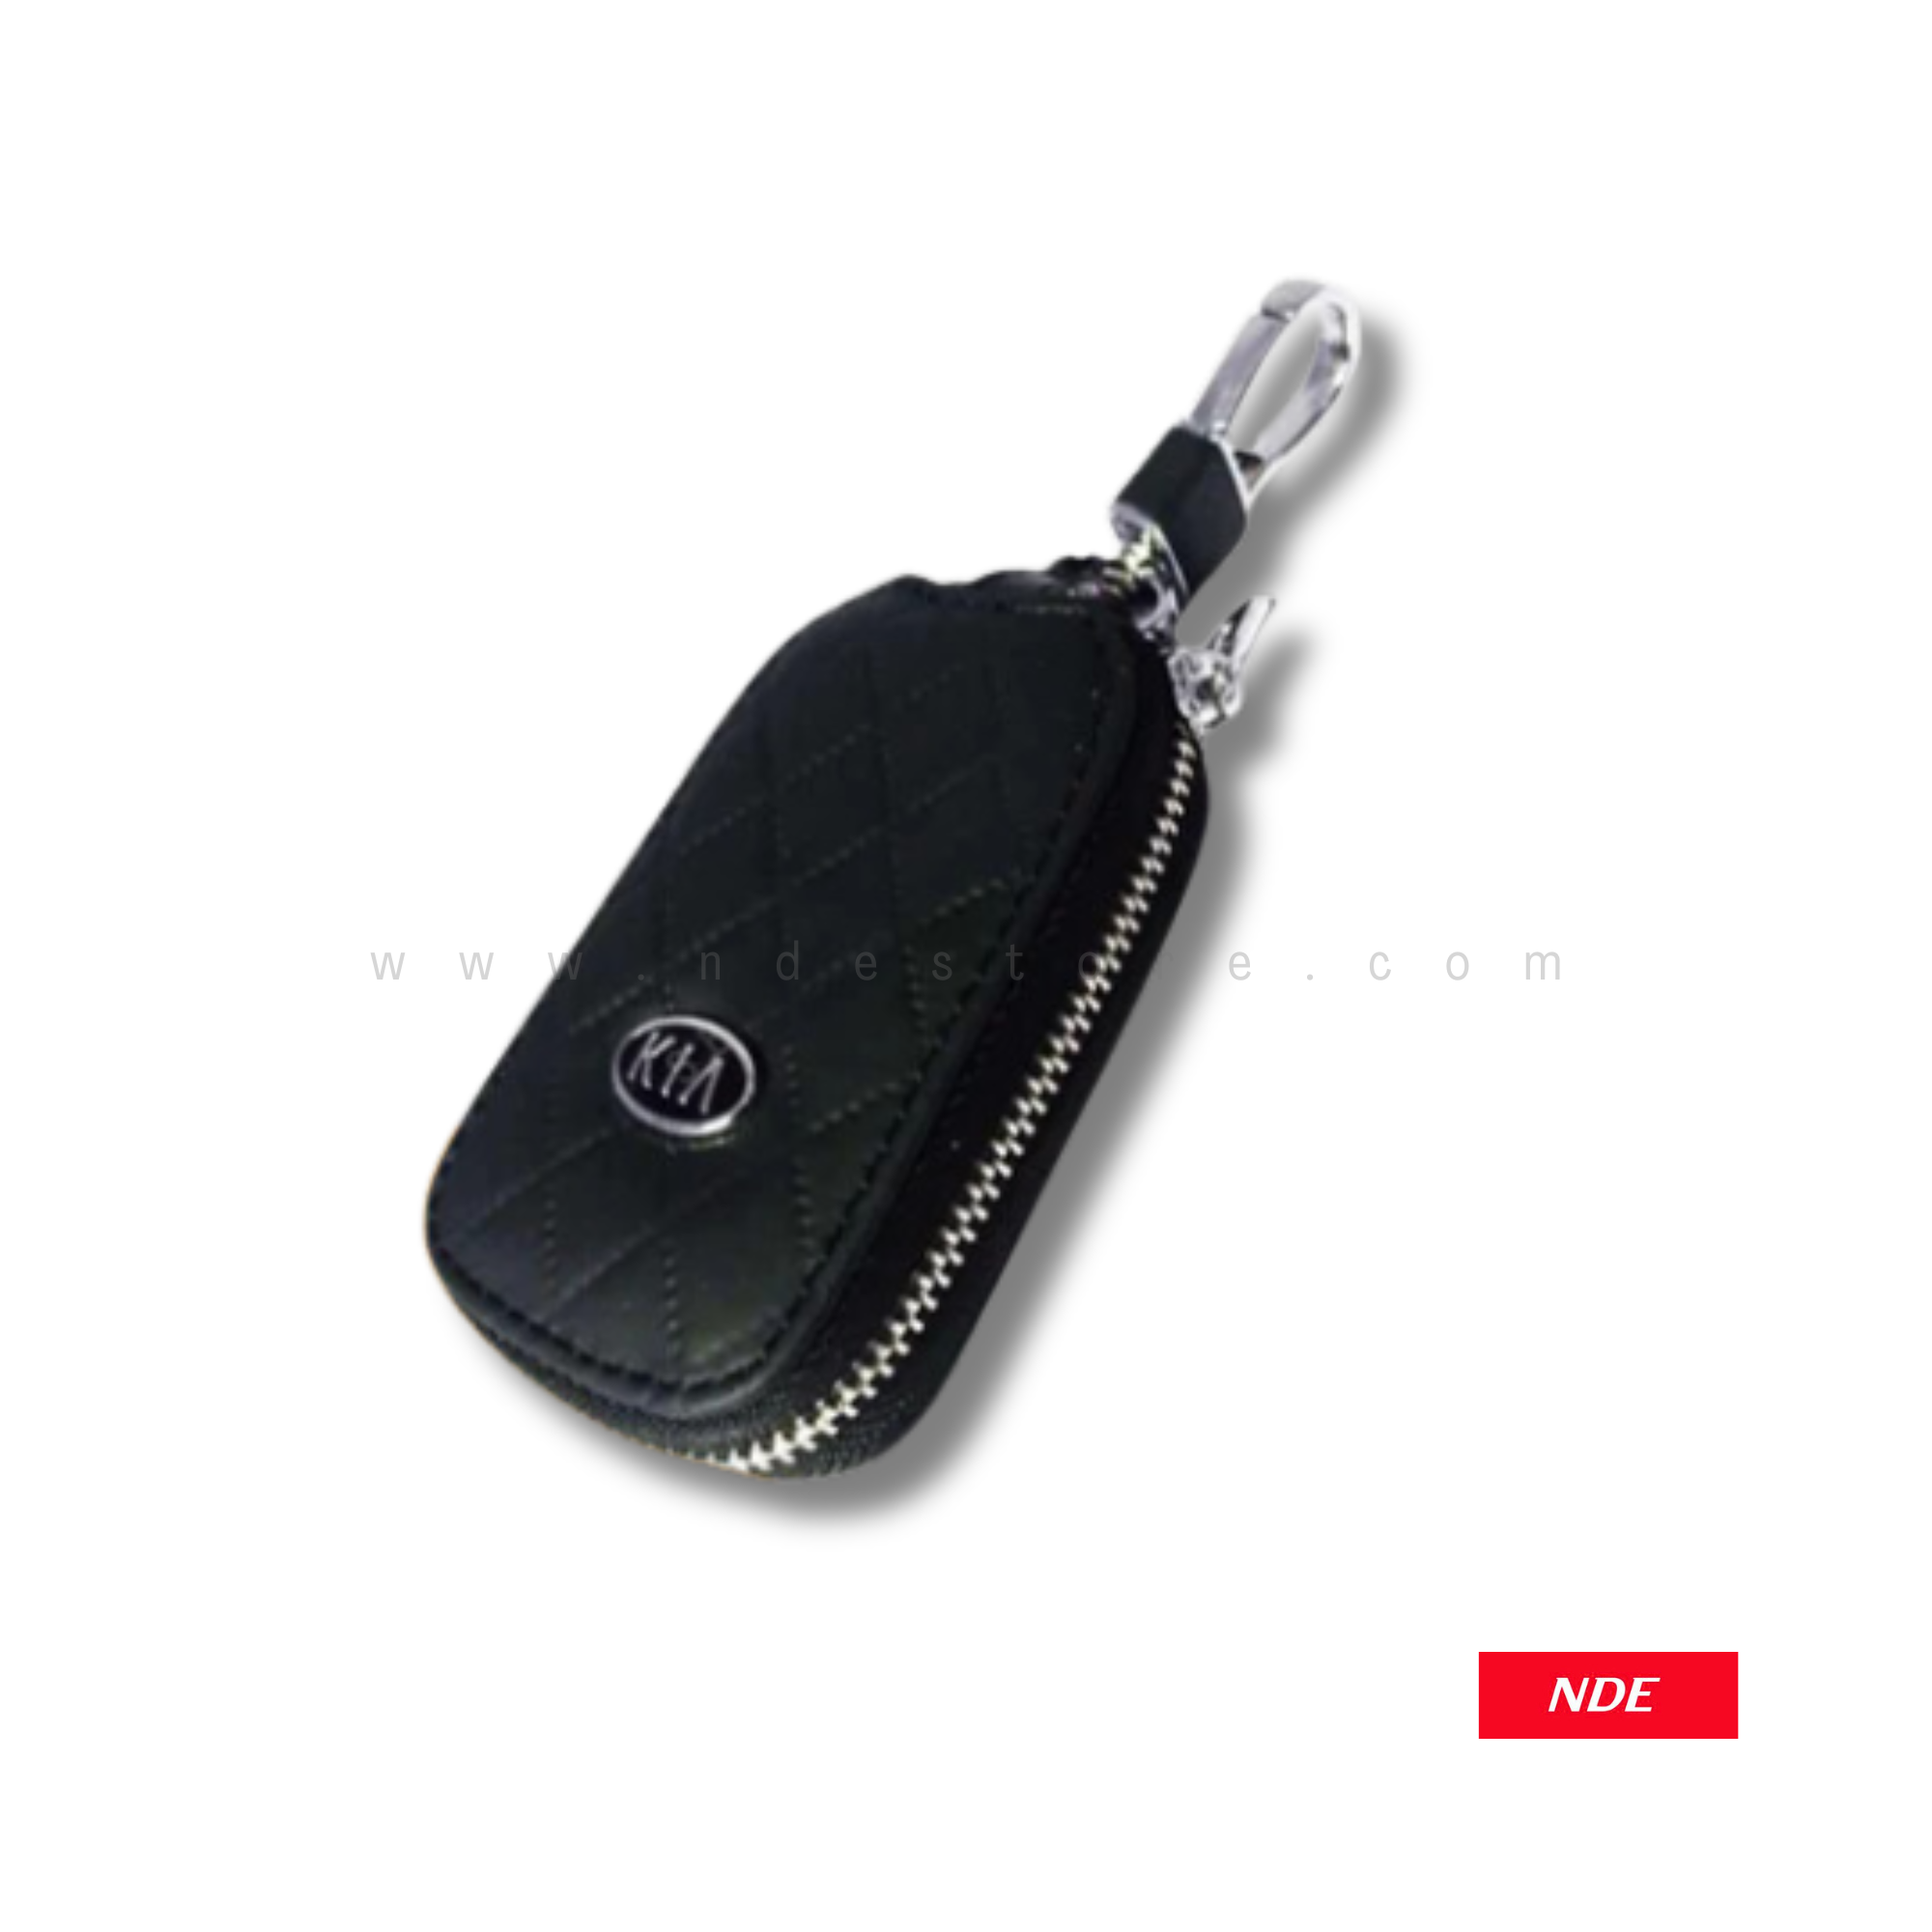 REMOTE COVER KEY POUCH PREMIUM LEATHER MATERIAL WITH KIA LOGO (MADE IN CHINA)